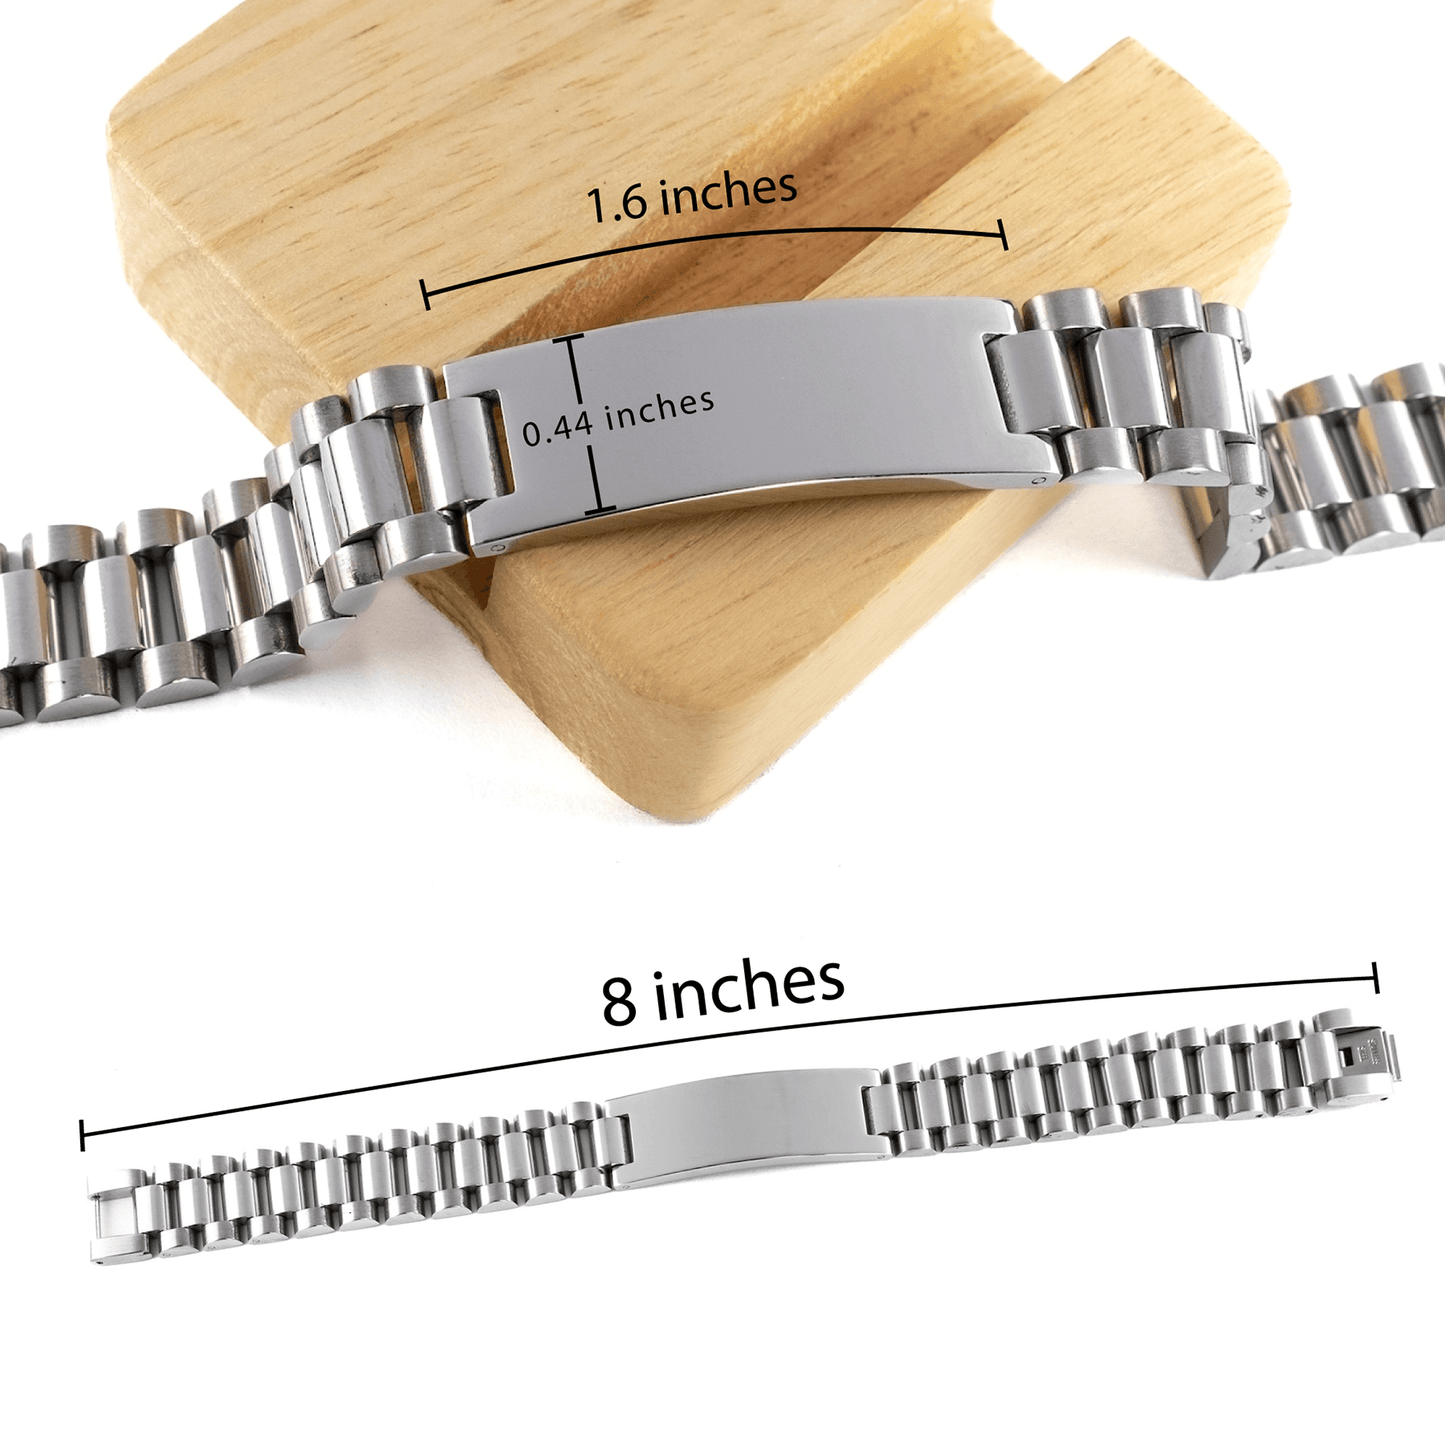 I'm from Georgia, Deal with it, Proud Georgia State Gifts, Georgia Ladder Stainless Steel Bracelet Gift Idea, Christmas Gifts for Georgia People, Coworkers, Colleague - Mallard Moon Gift Shop